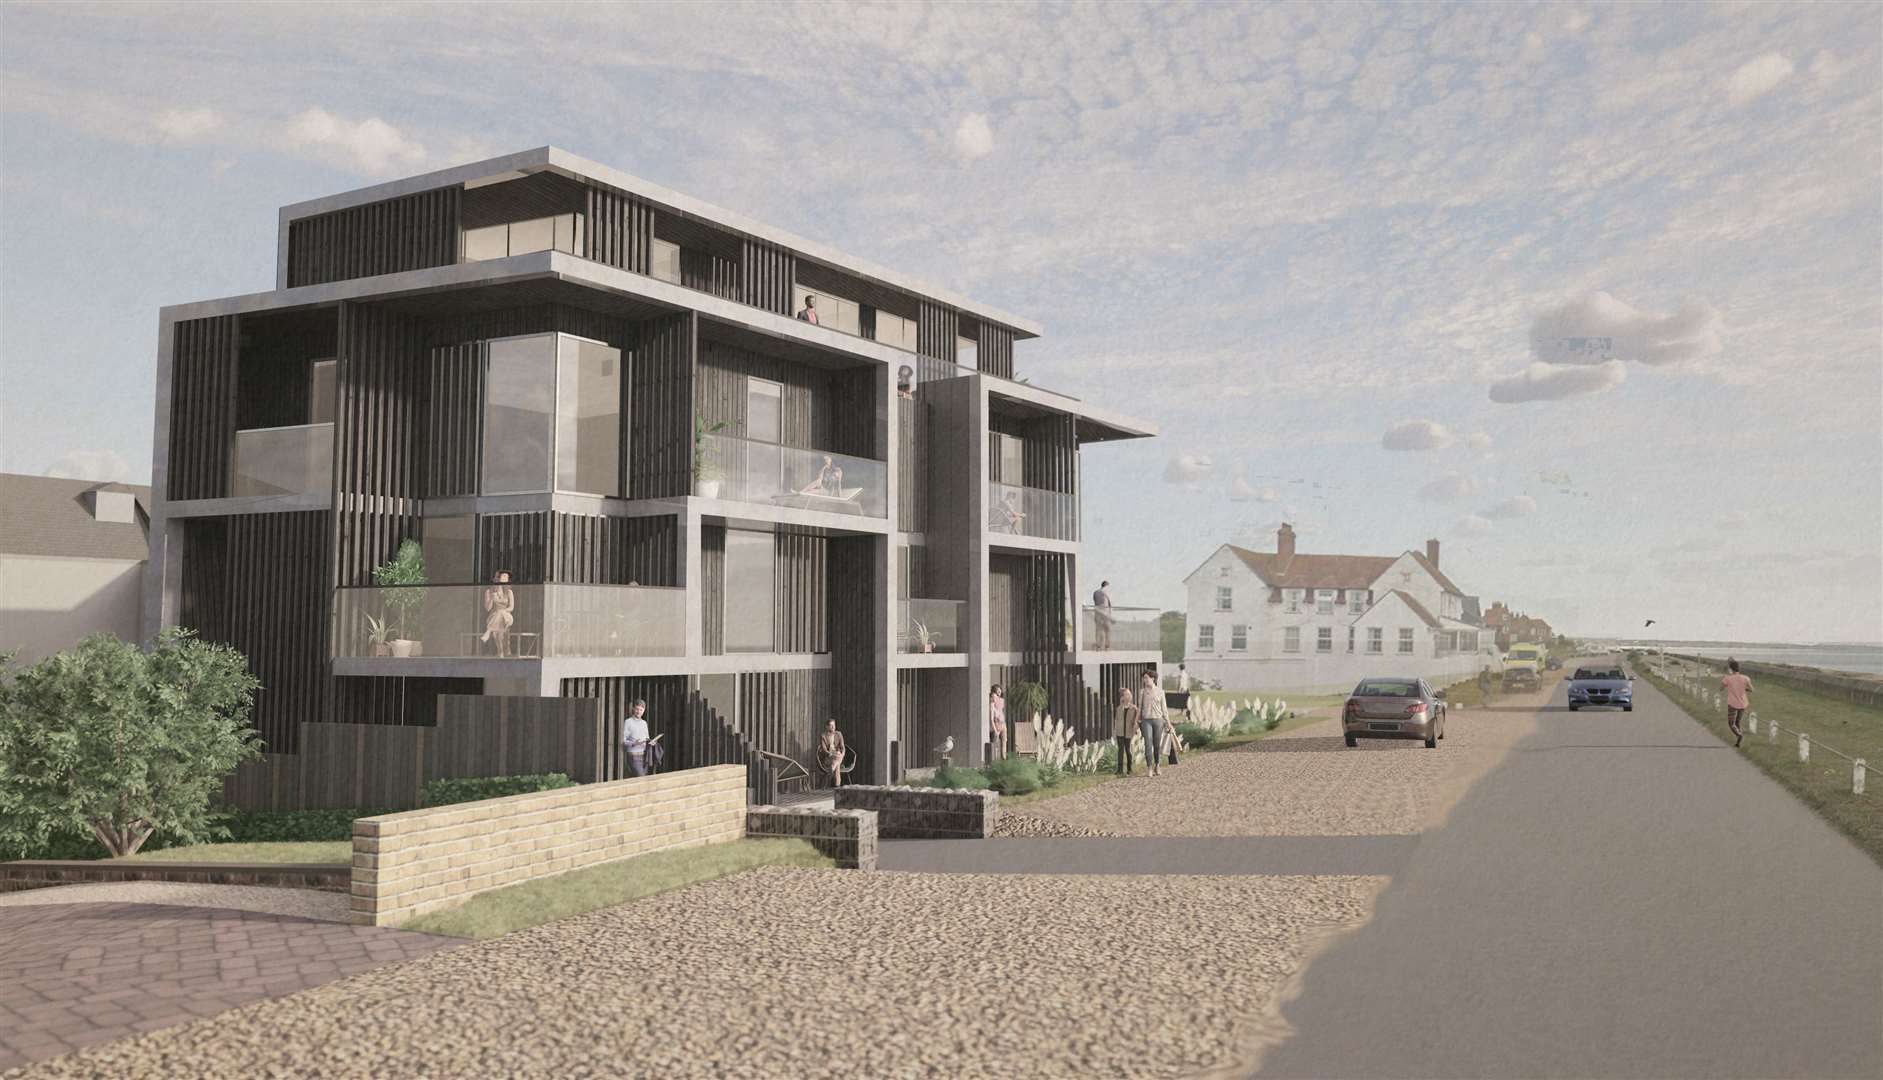 A computer-generated artist's impression of the proposed transformation of Sandbanks Care Home. Picture: Hollaway.